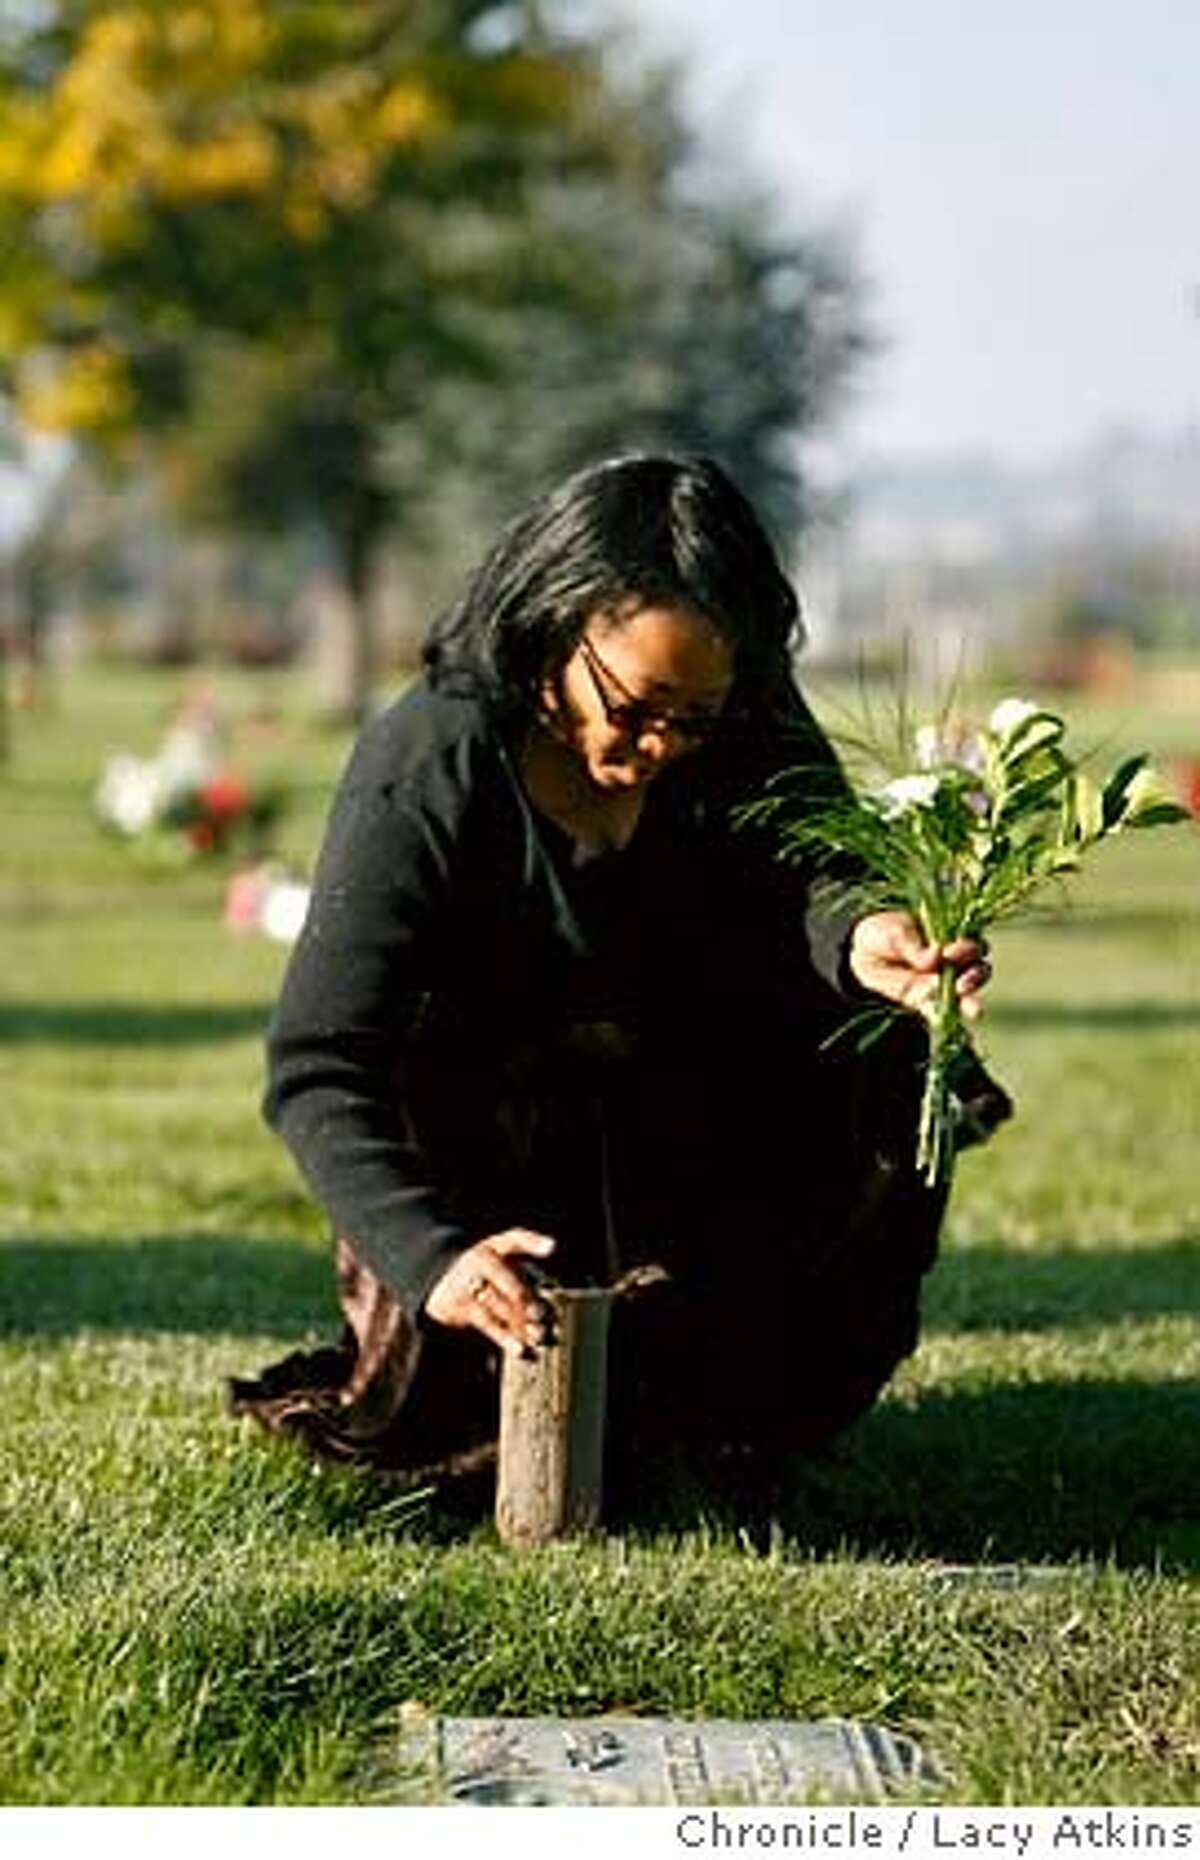 Lorrain Taylor visits her sons grave at the Chapel of the Chimes Memorial Park, Sunday Dec. 3, 2006, in Hayward, Ca. Because they are buried here, she remains in the bay area rather than near her other living son, Gregory, in Houston. Her twin sons Albade and Obadiah were killed in February of 2000. (Lacy Atkins / The Chronicle)